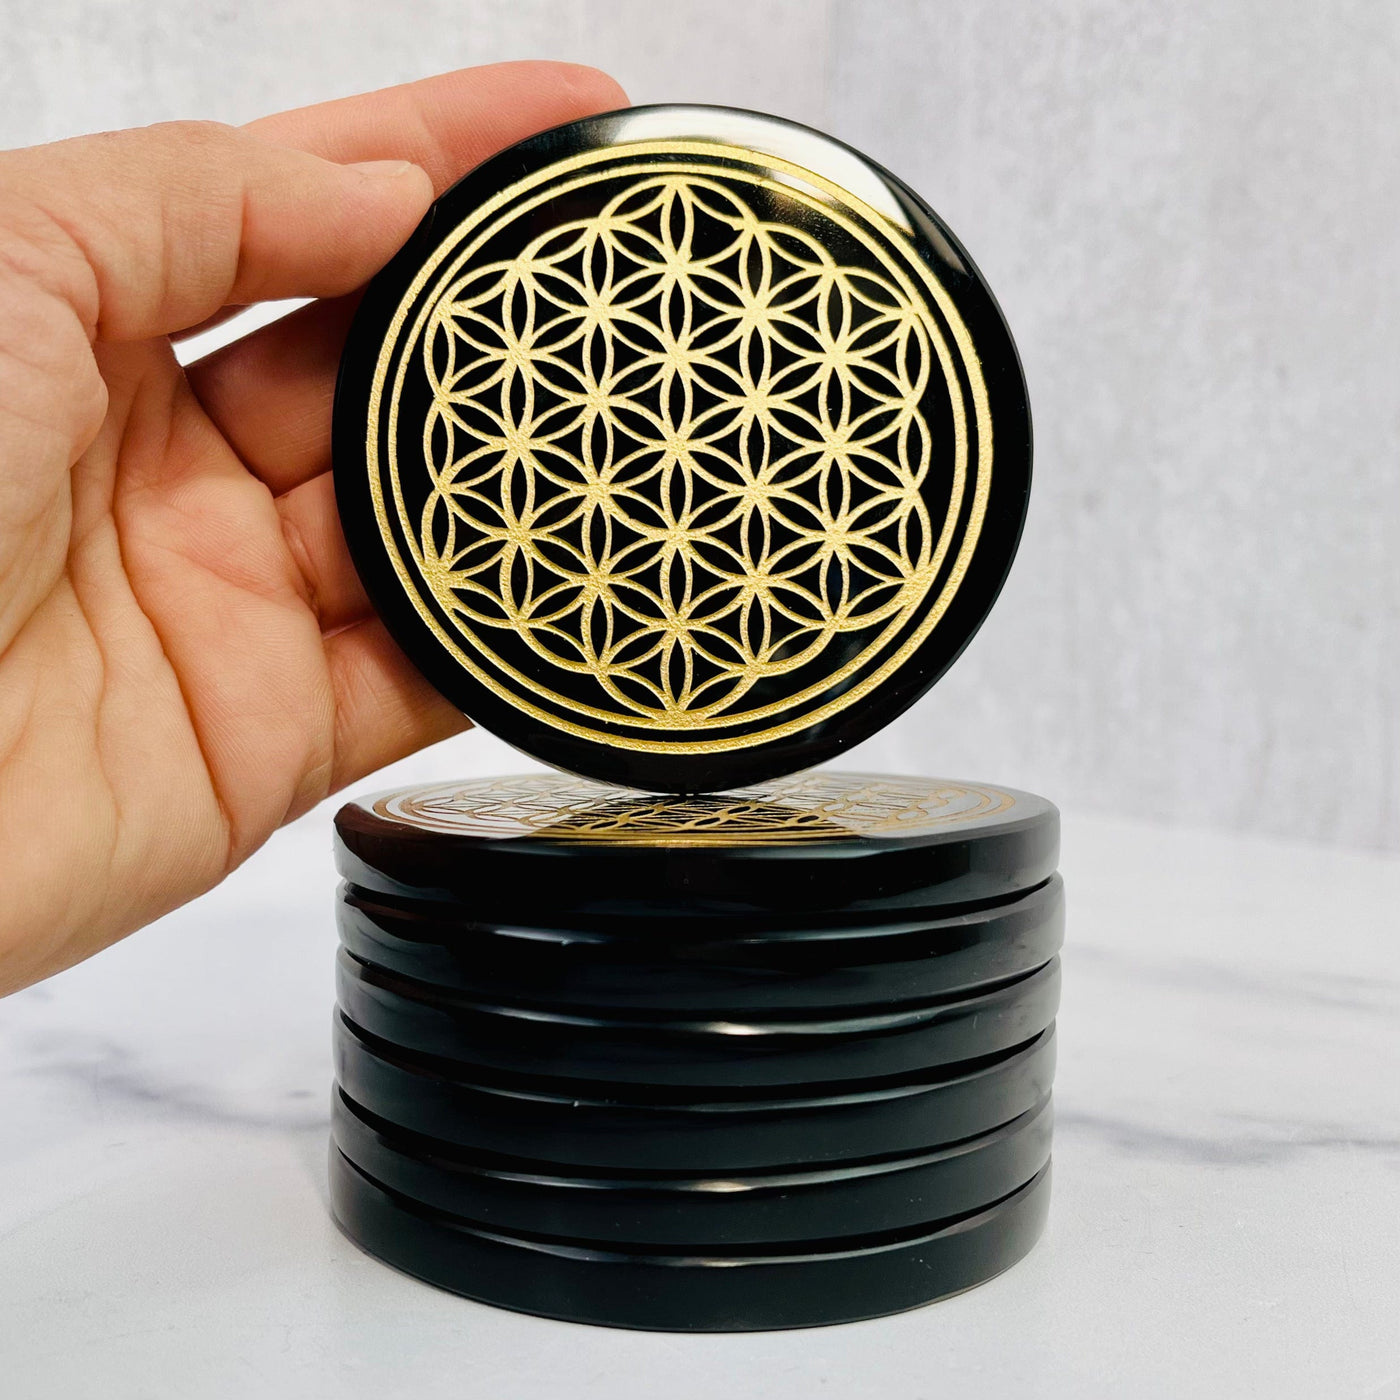 Stacked Black Obsidian Coasters with top one held up by woman's hand to show the flower of life engraving.